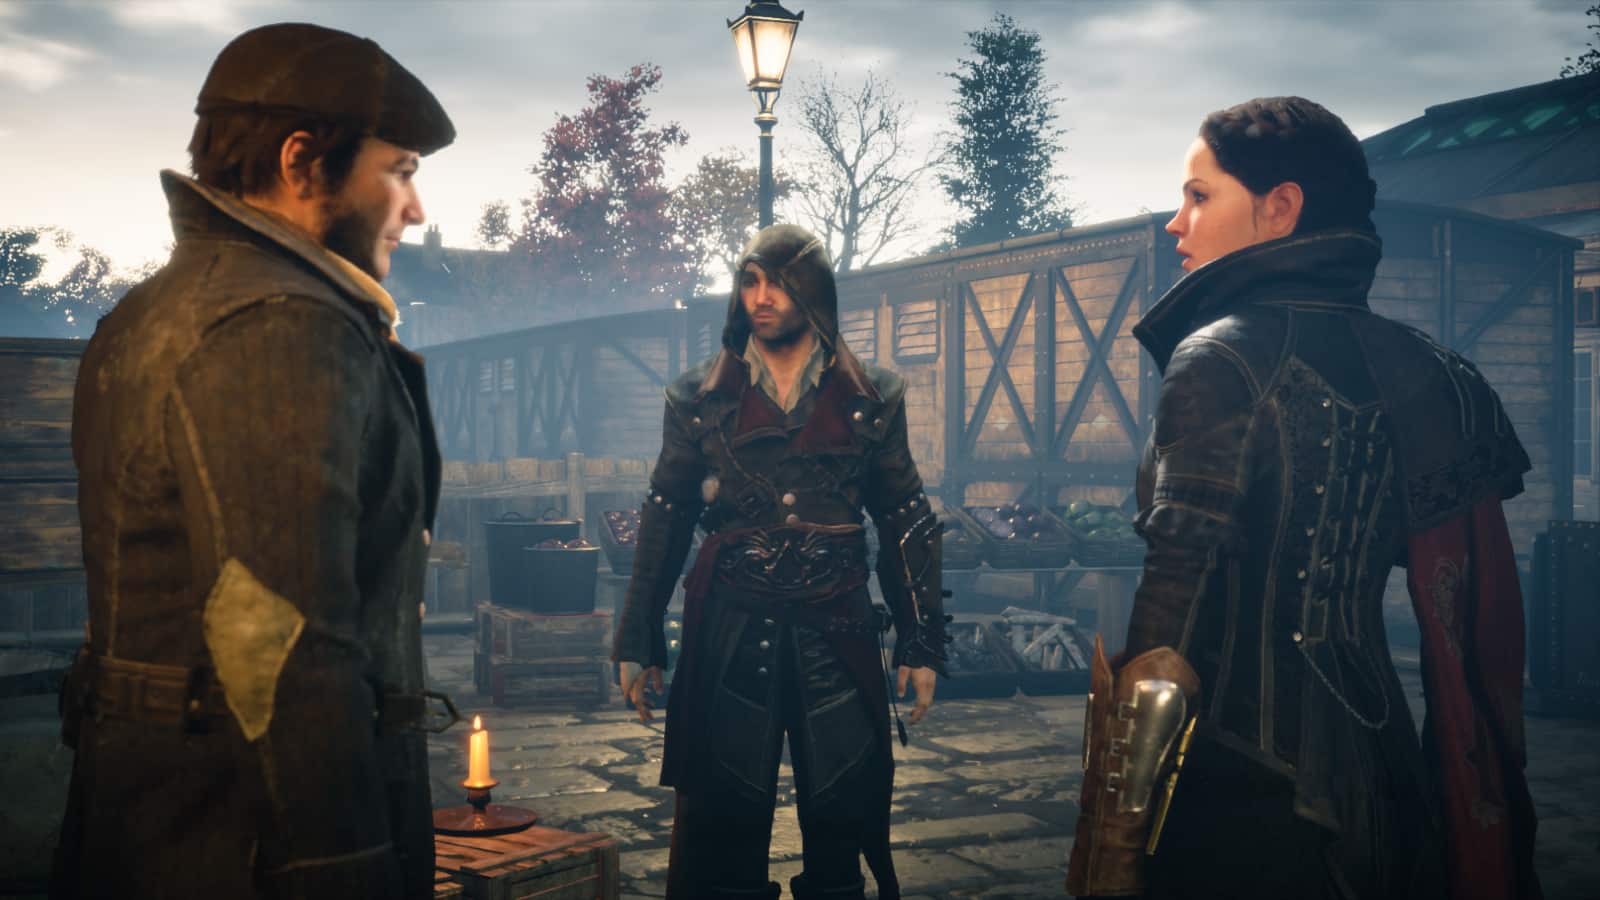 The 10 Best Assassin's Creed Games - IGN